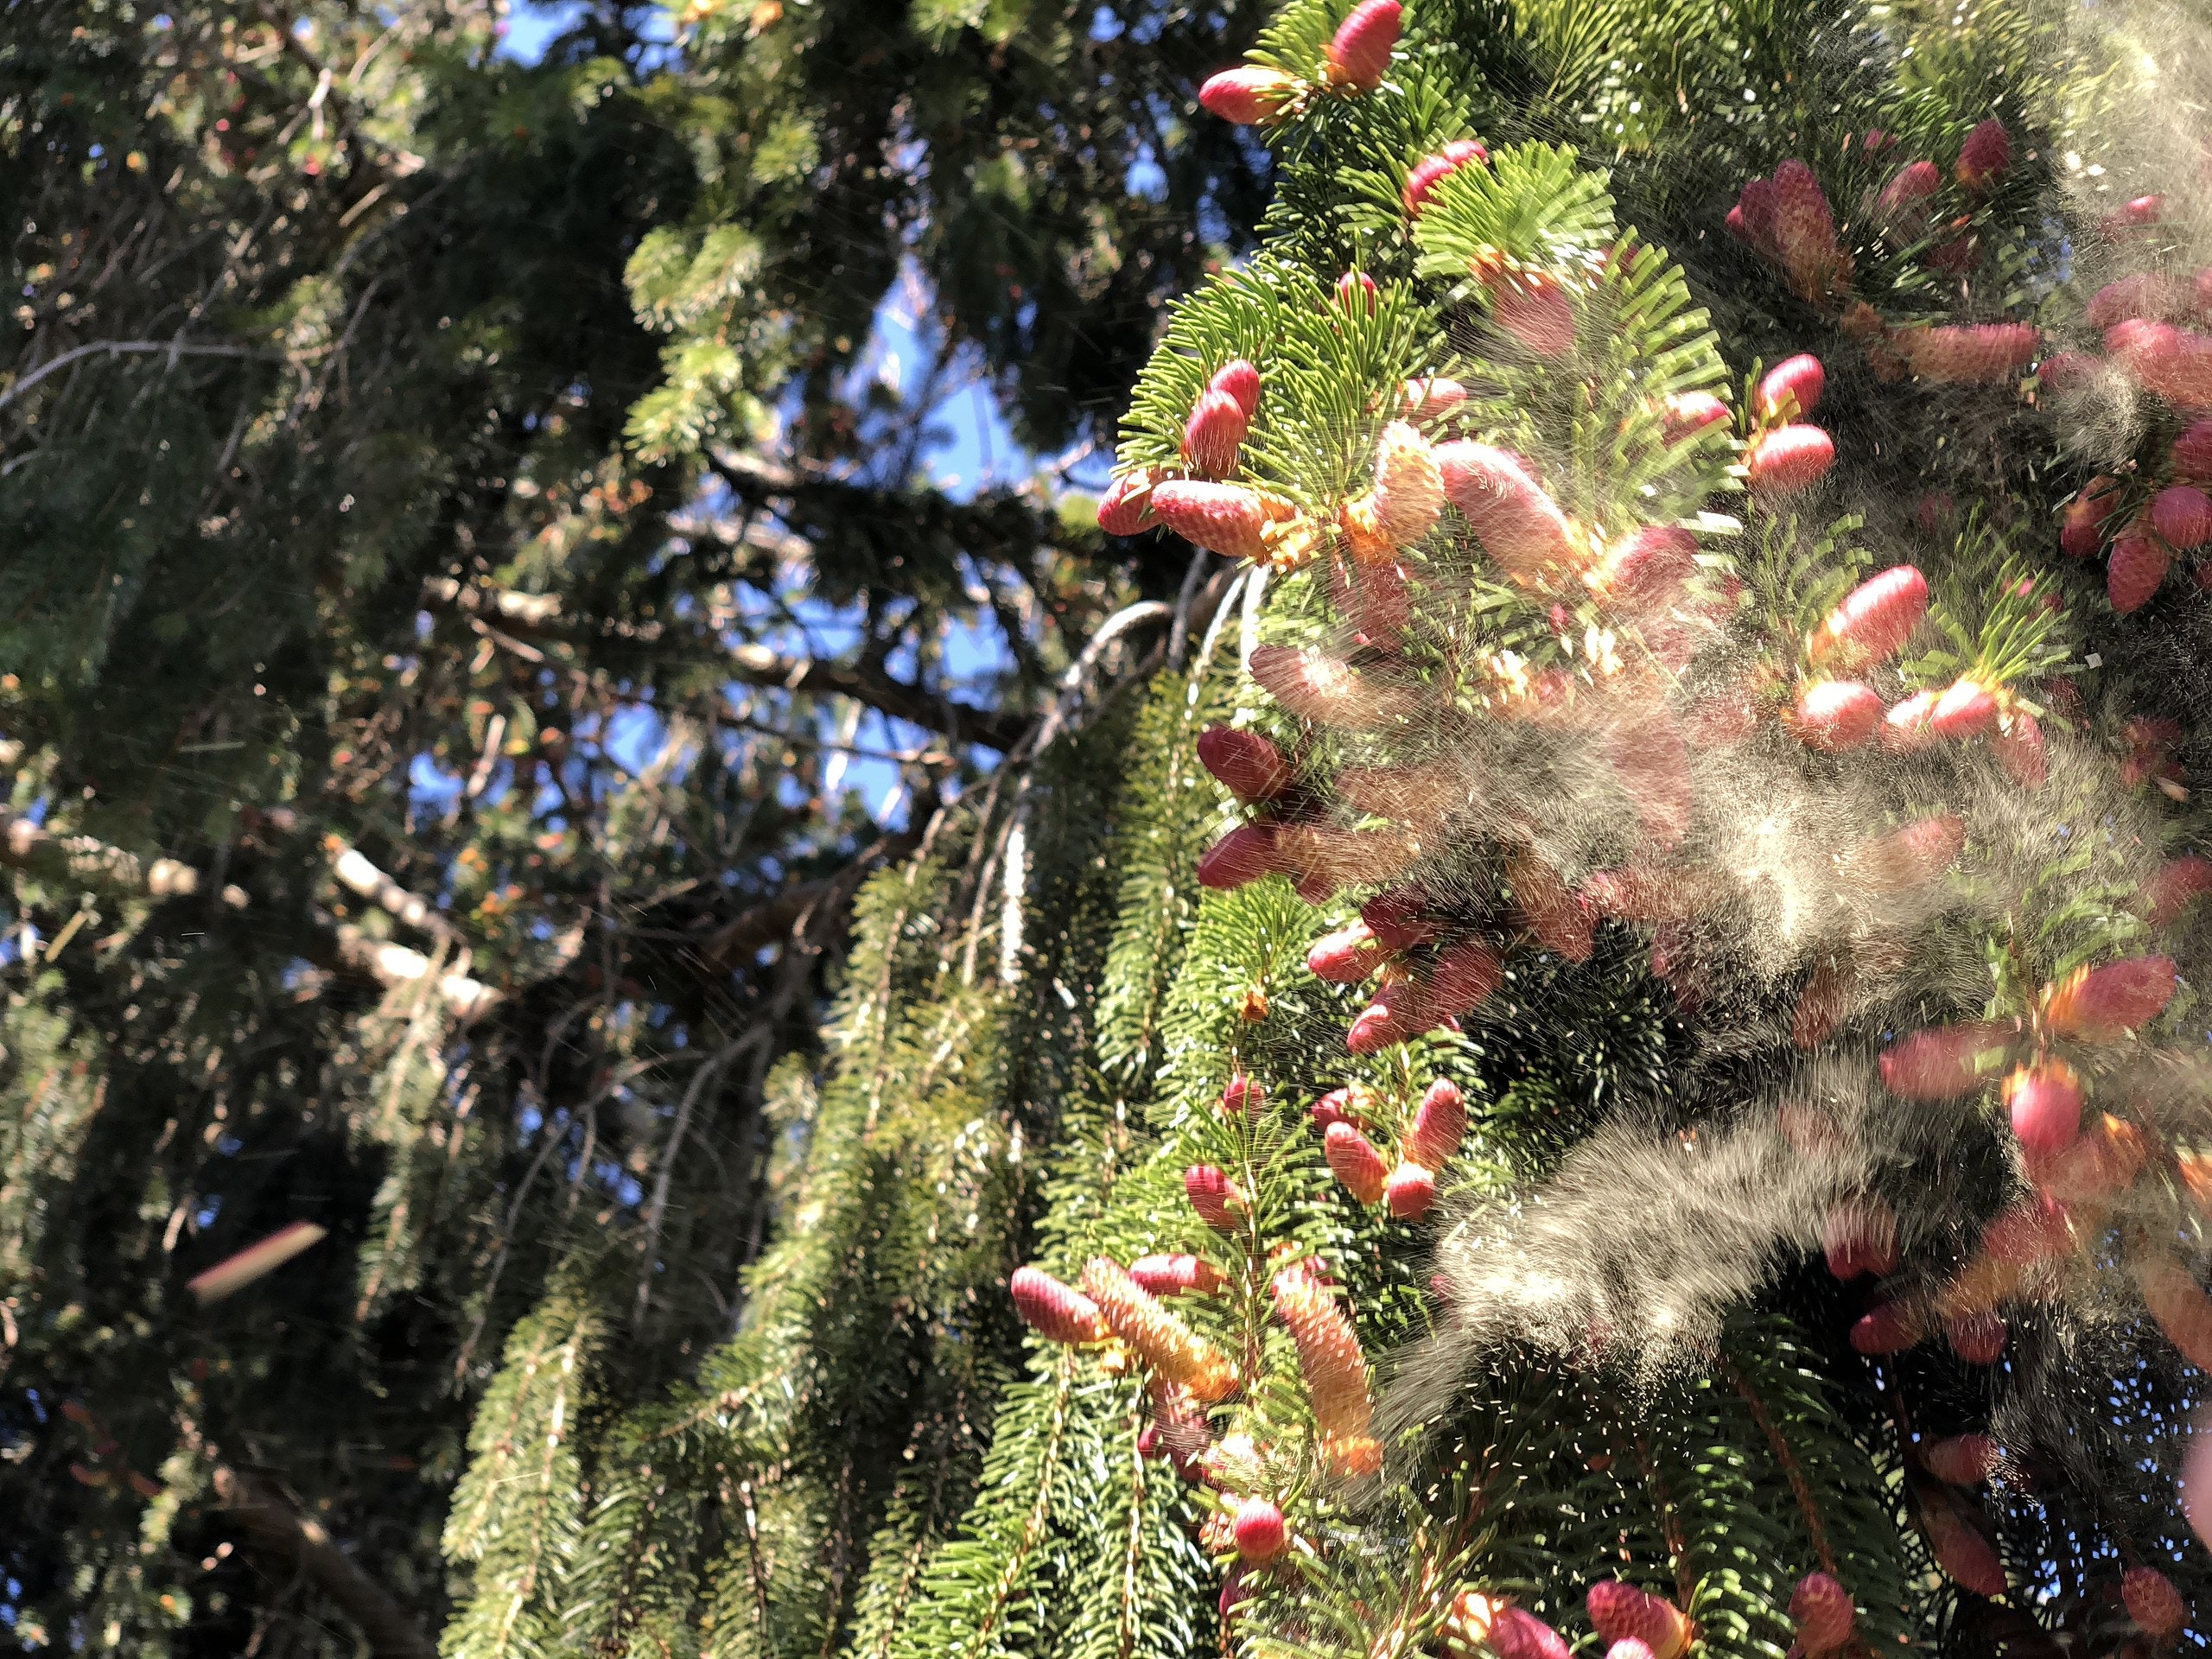 Dust-like pollen falls from pine cones